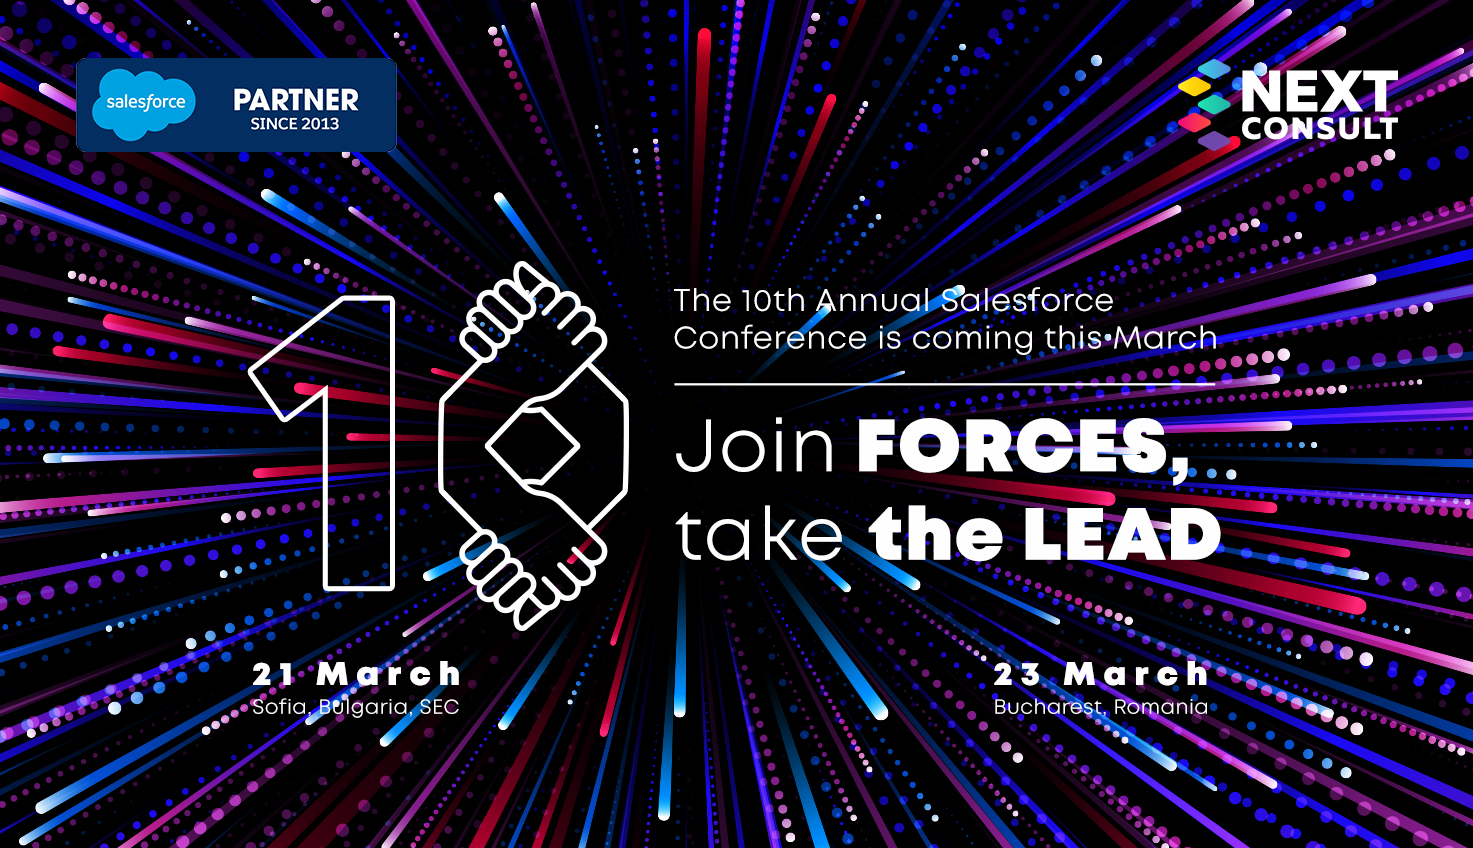 The 10th Annual Salesforce Conference is coming this March: Join FORCES together, take the LEADThe team of Next Consult is happy to announce that as part of our mission to make businesses more successful, we're holding our flagship Salesforce Conference for the 10th consecutive time - on March 21 in Sofia, Bulgaria and on March 23 in Bucharest, Romania. Next Consult has been a Salesforce partner for 10 years now.